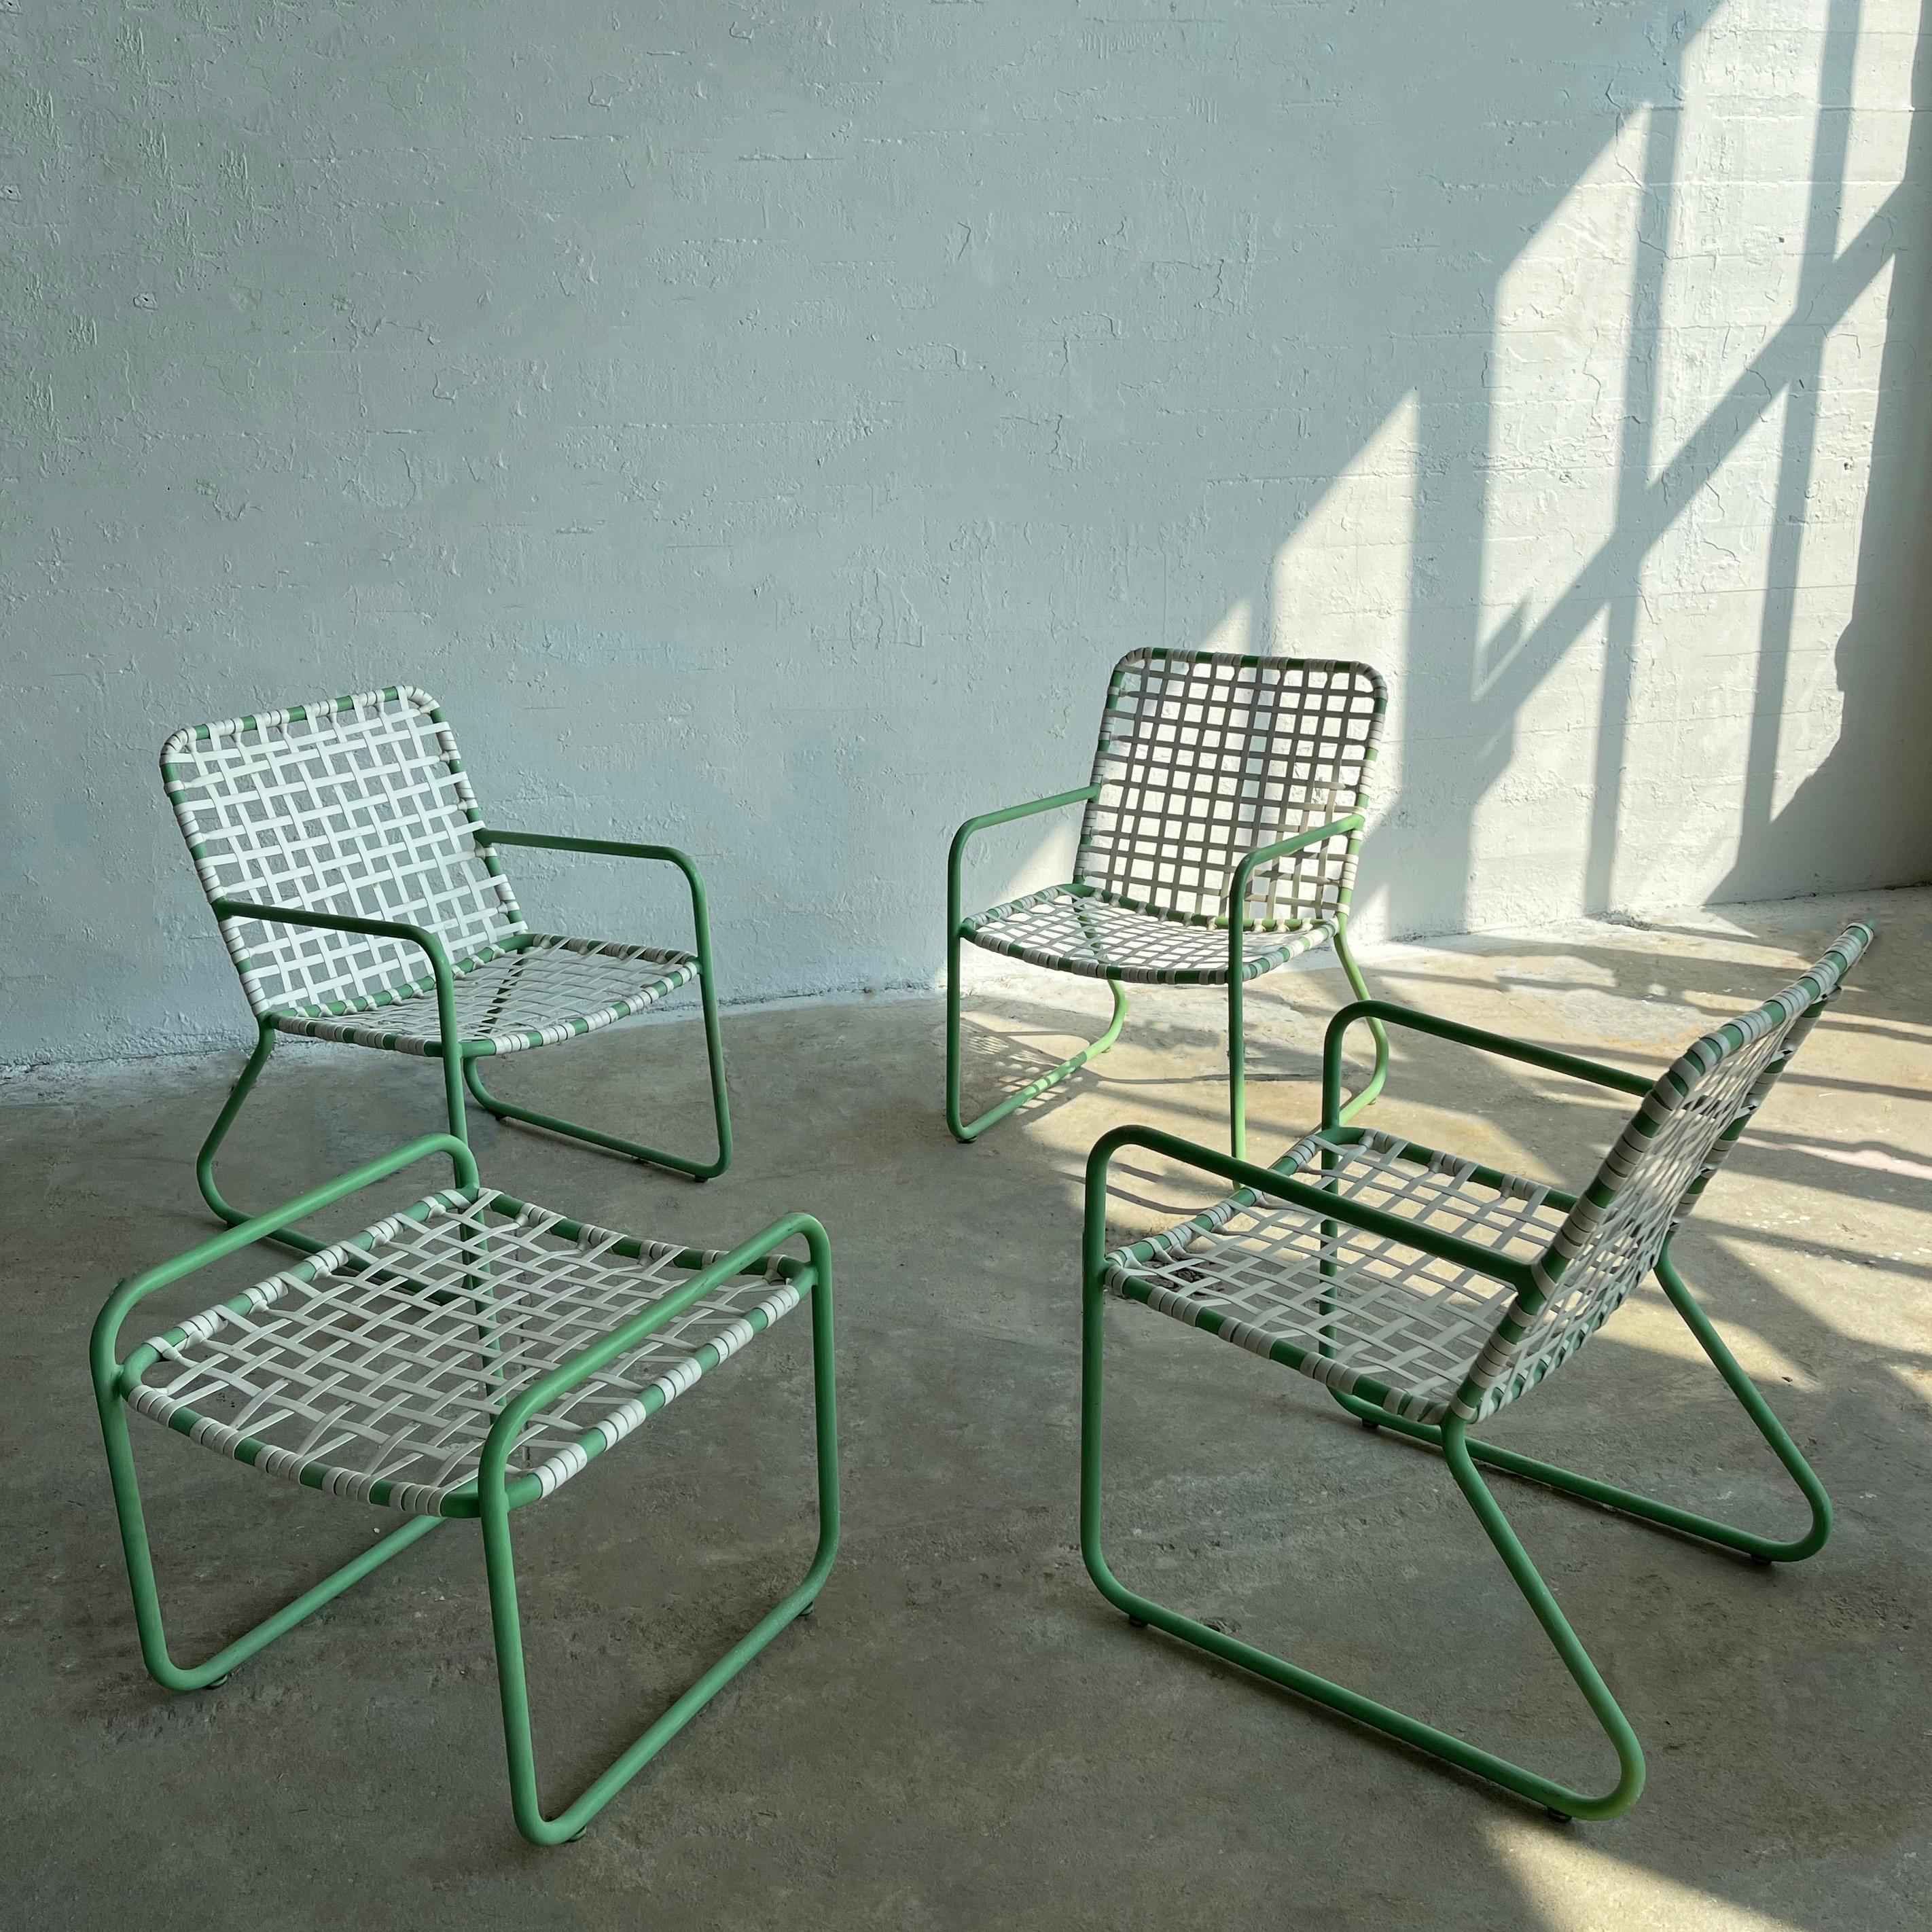 Classic, mid-century modern, four piece, outdoor, patio seating set by Brown Jordan features three armchairs and one ottoman.  The mint green painted tubular metal frames with woven white plastic seats and backs are roomy, comfortable and light